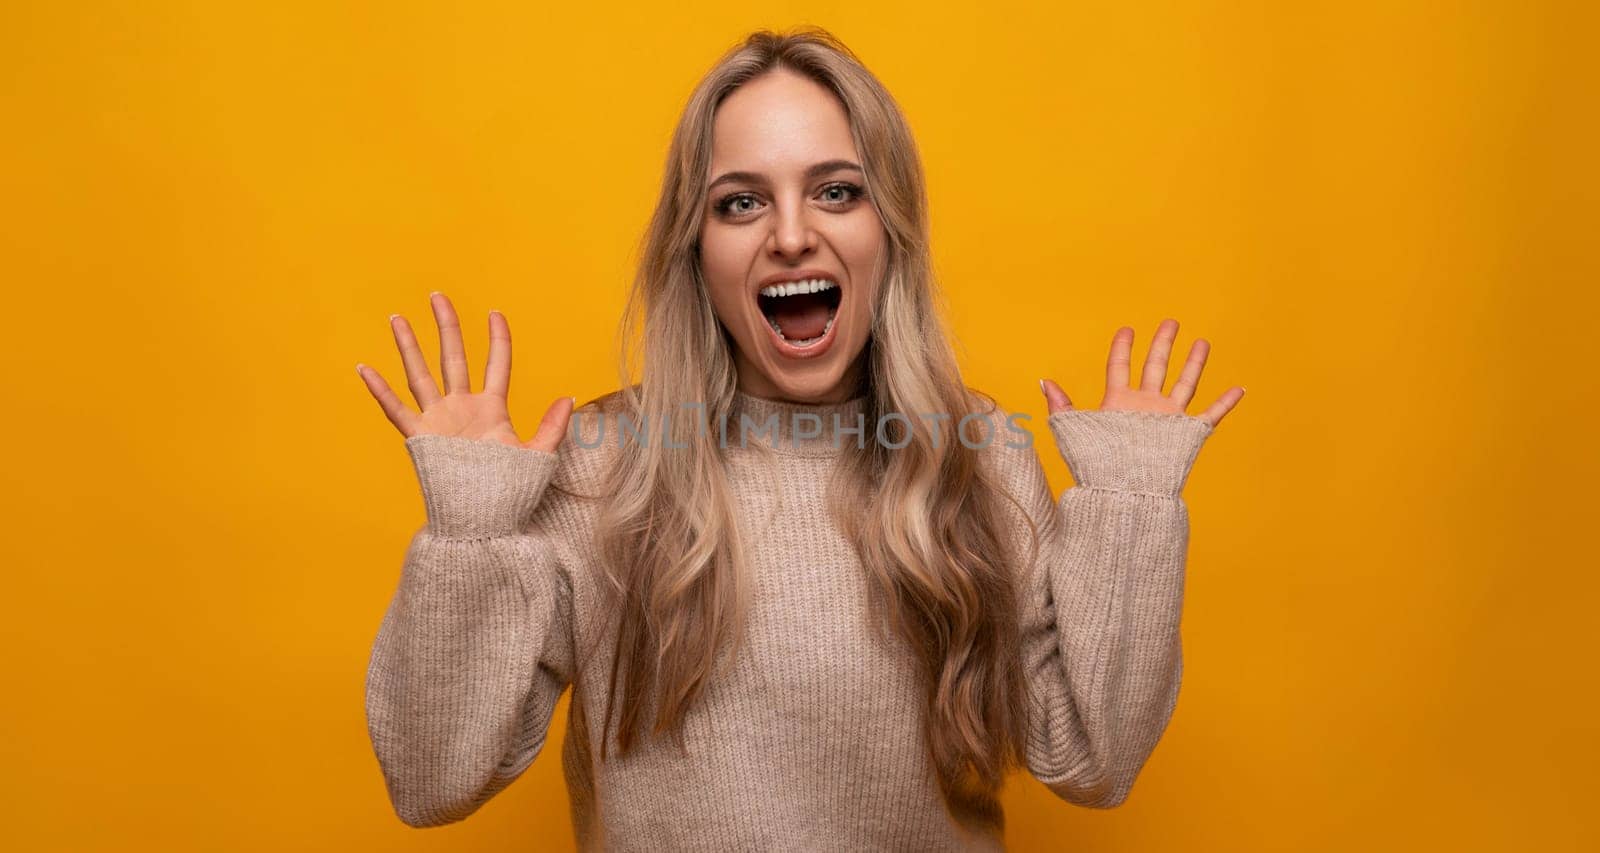 photo of a girl happily waving hand on a yellow background by TRMK